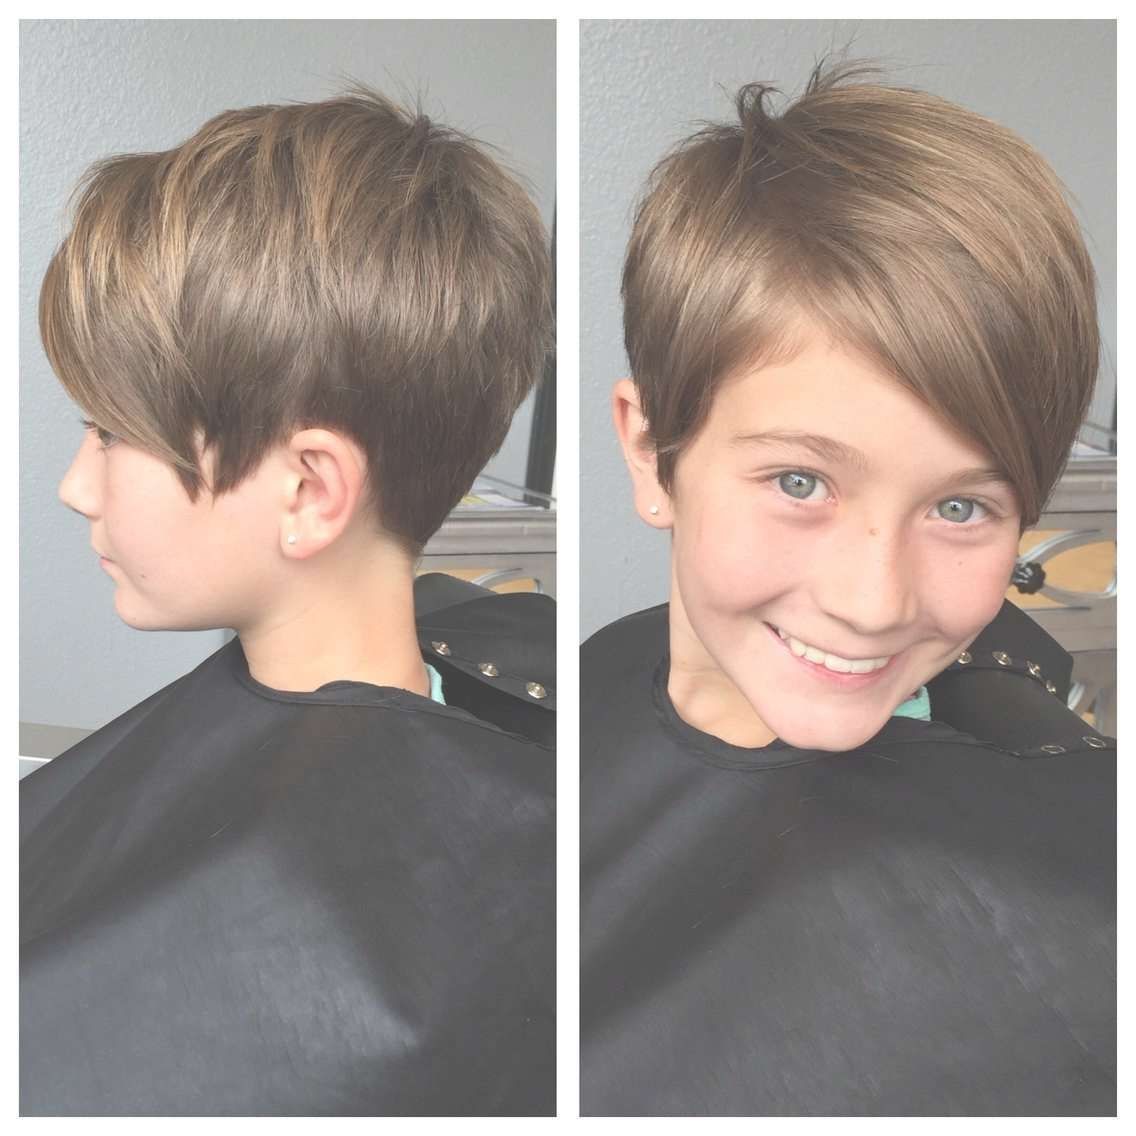 Kids Pixie Haircut | Hair | Pinterest | Pixie Haircut, Pixies And Pertaining To Most Current Childrens Pixie Hairstyles (View 2 of 16)